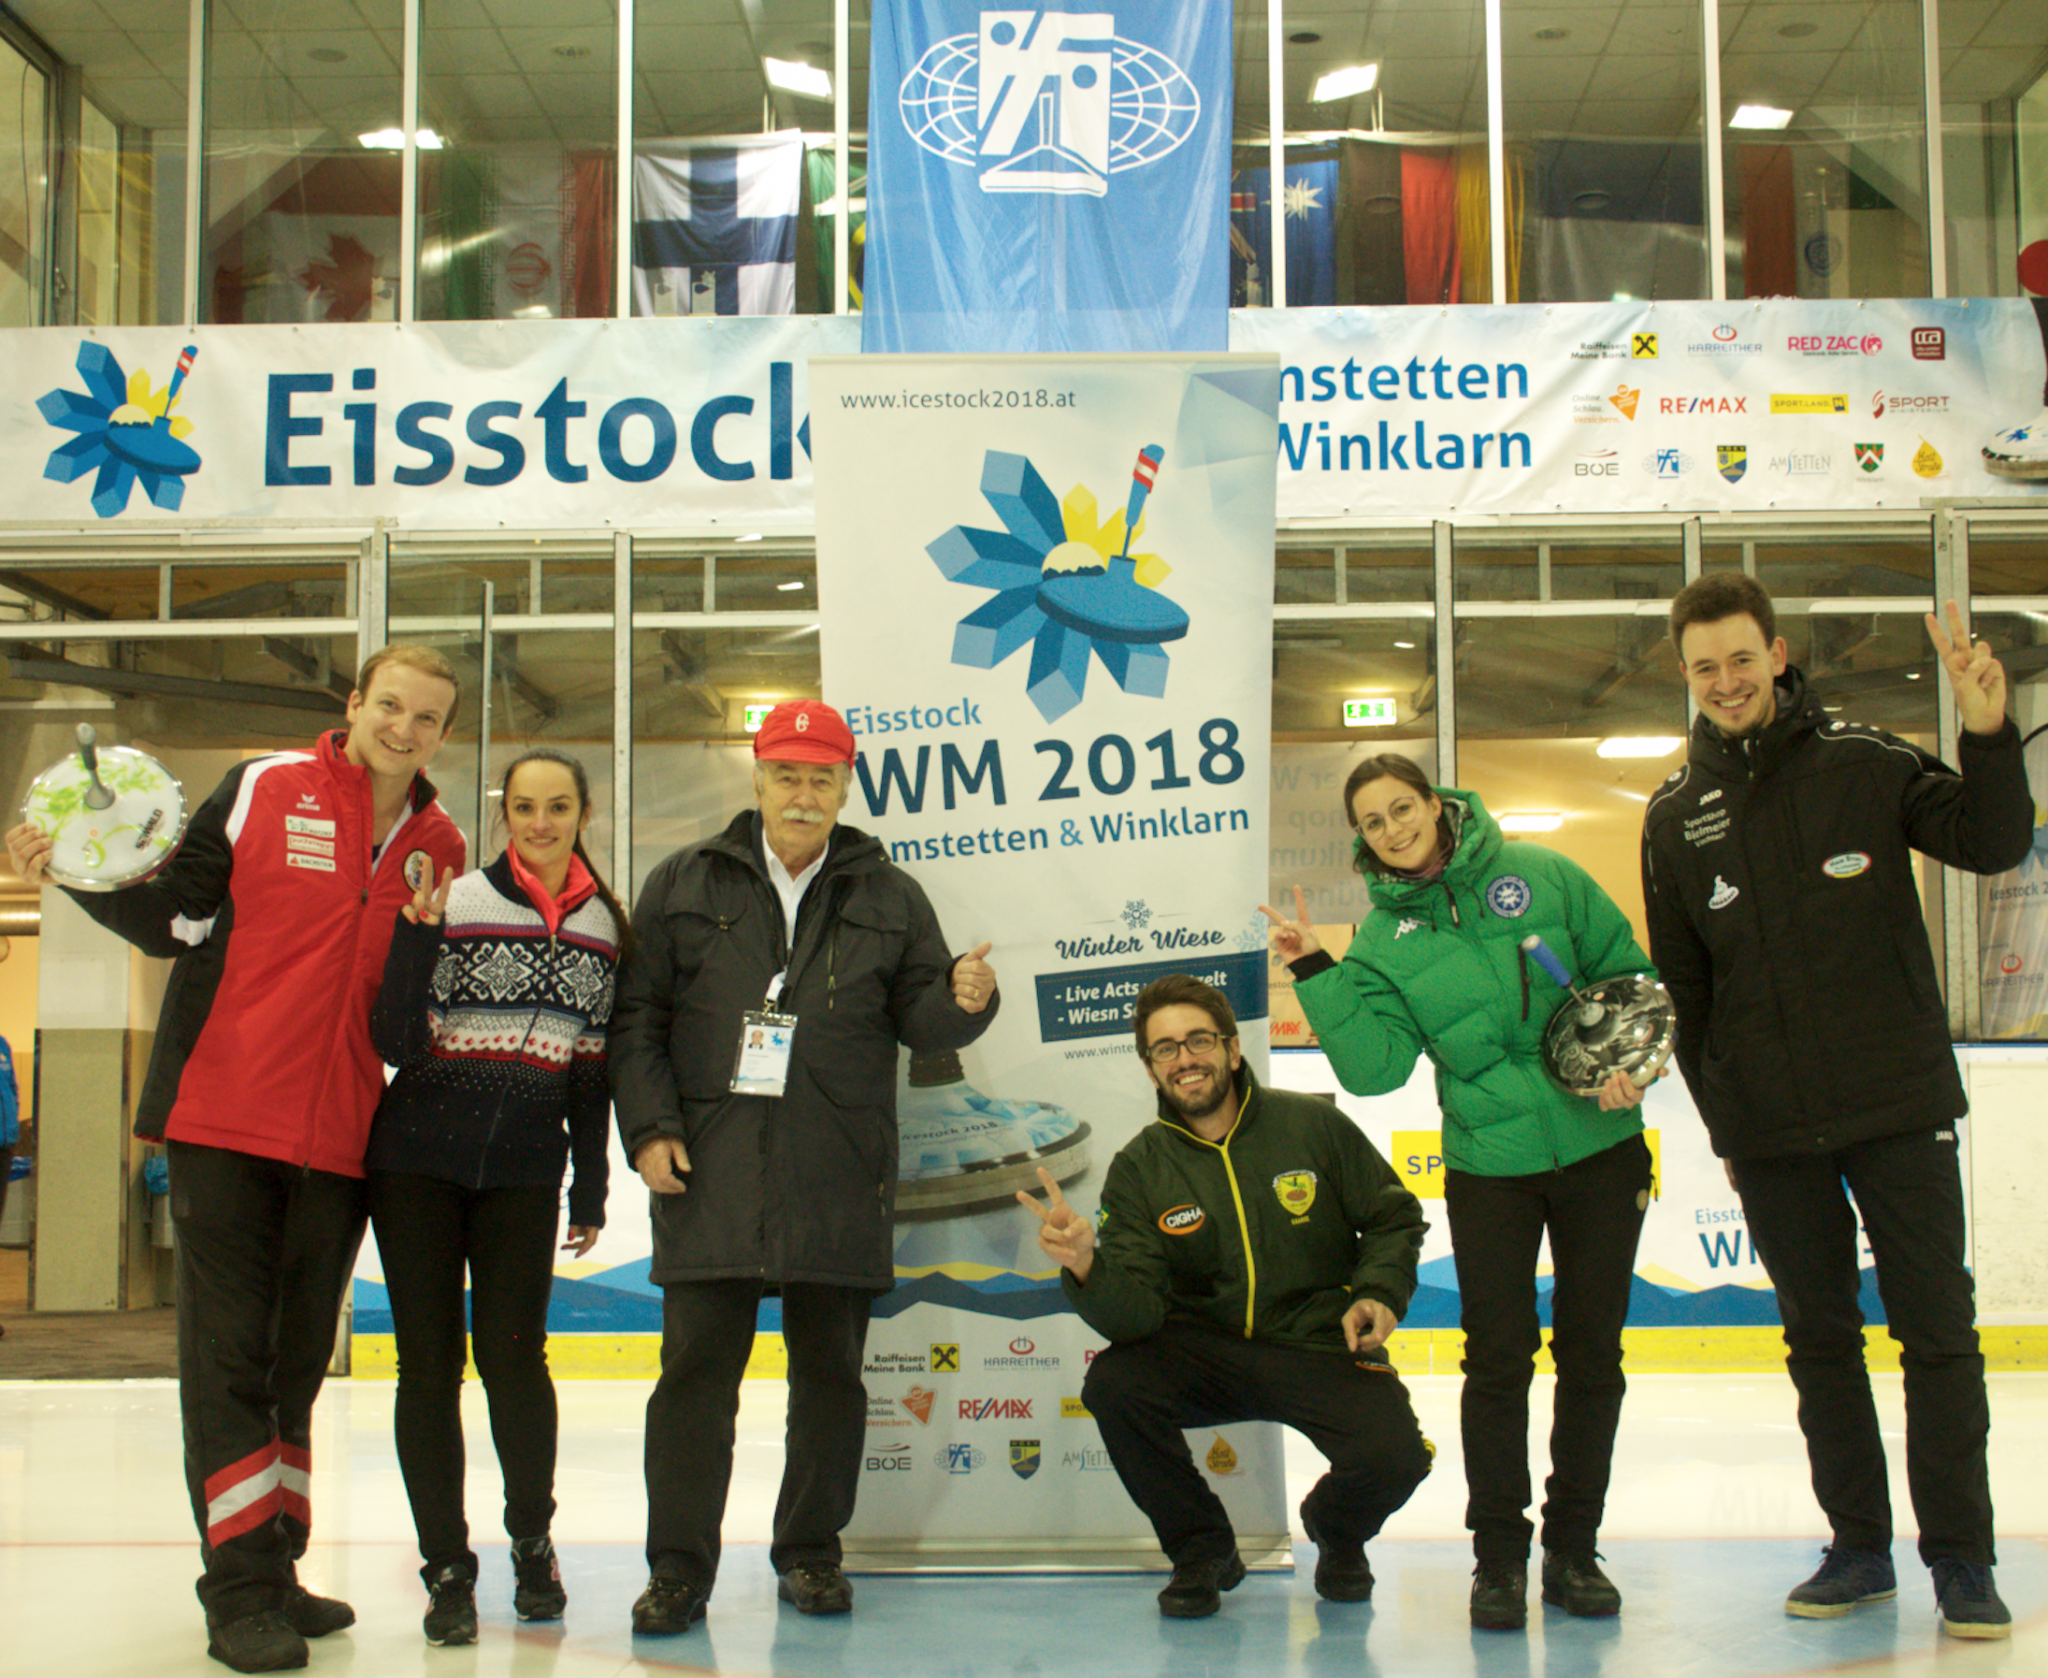 Manfred Schäfer, third from left, led the International Federation Icestocksport for 21 years ©IFI